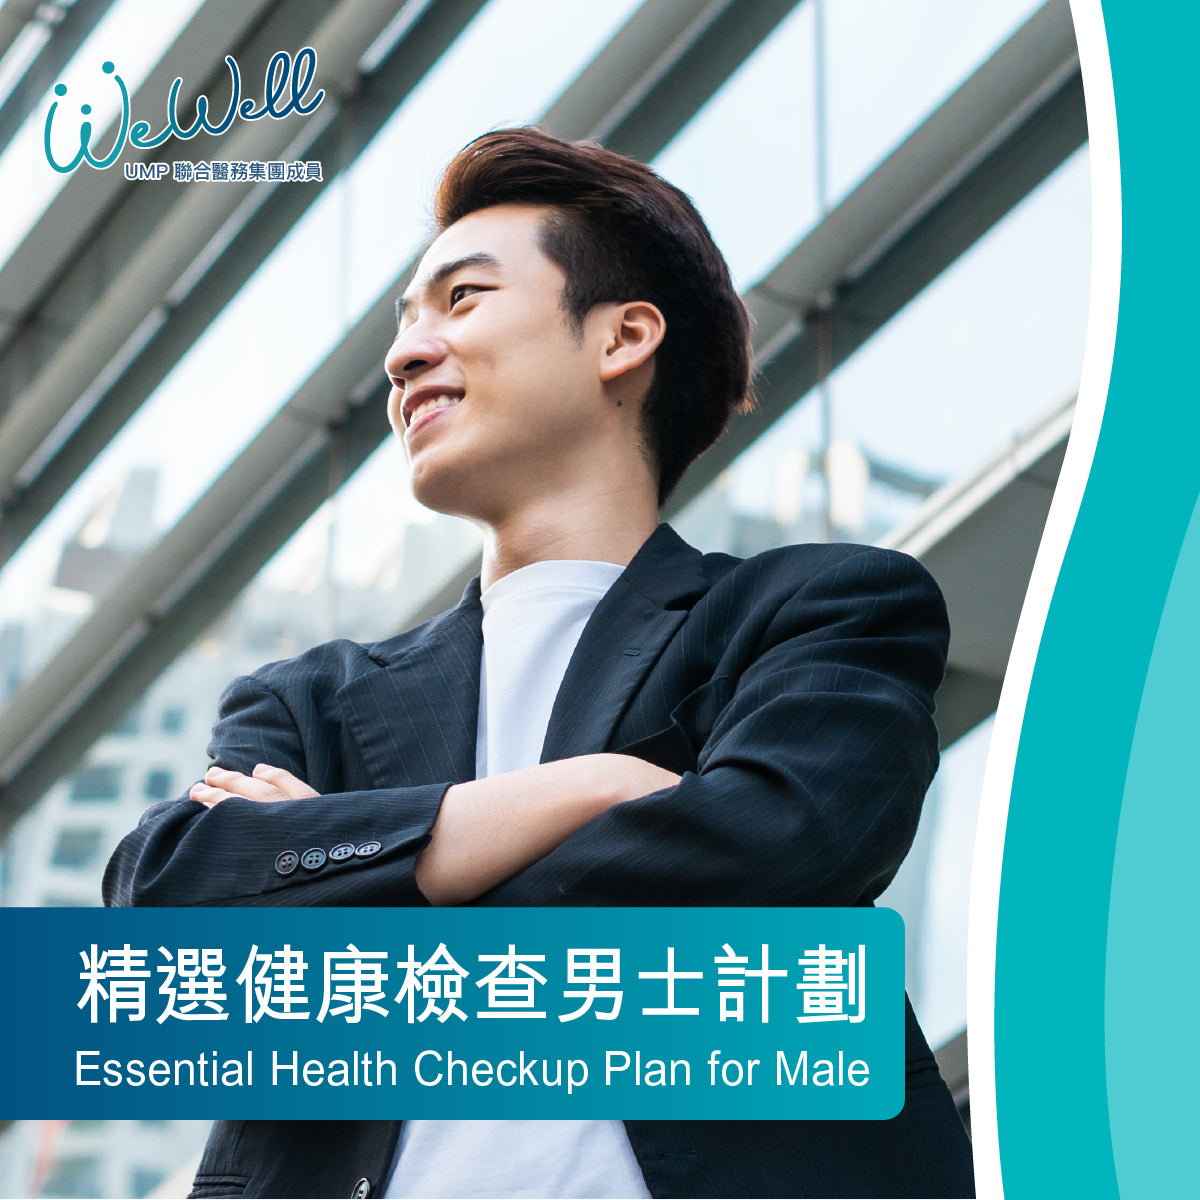 Essential Health Check-up Plan for Male